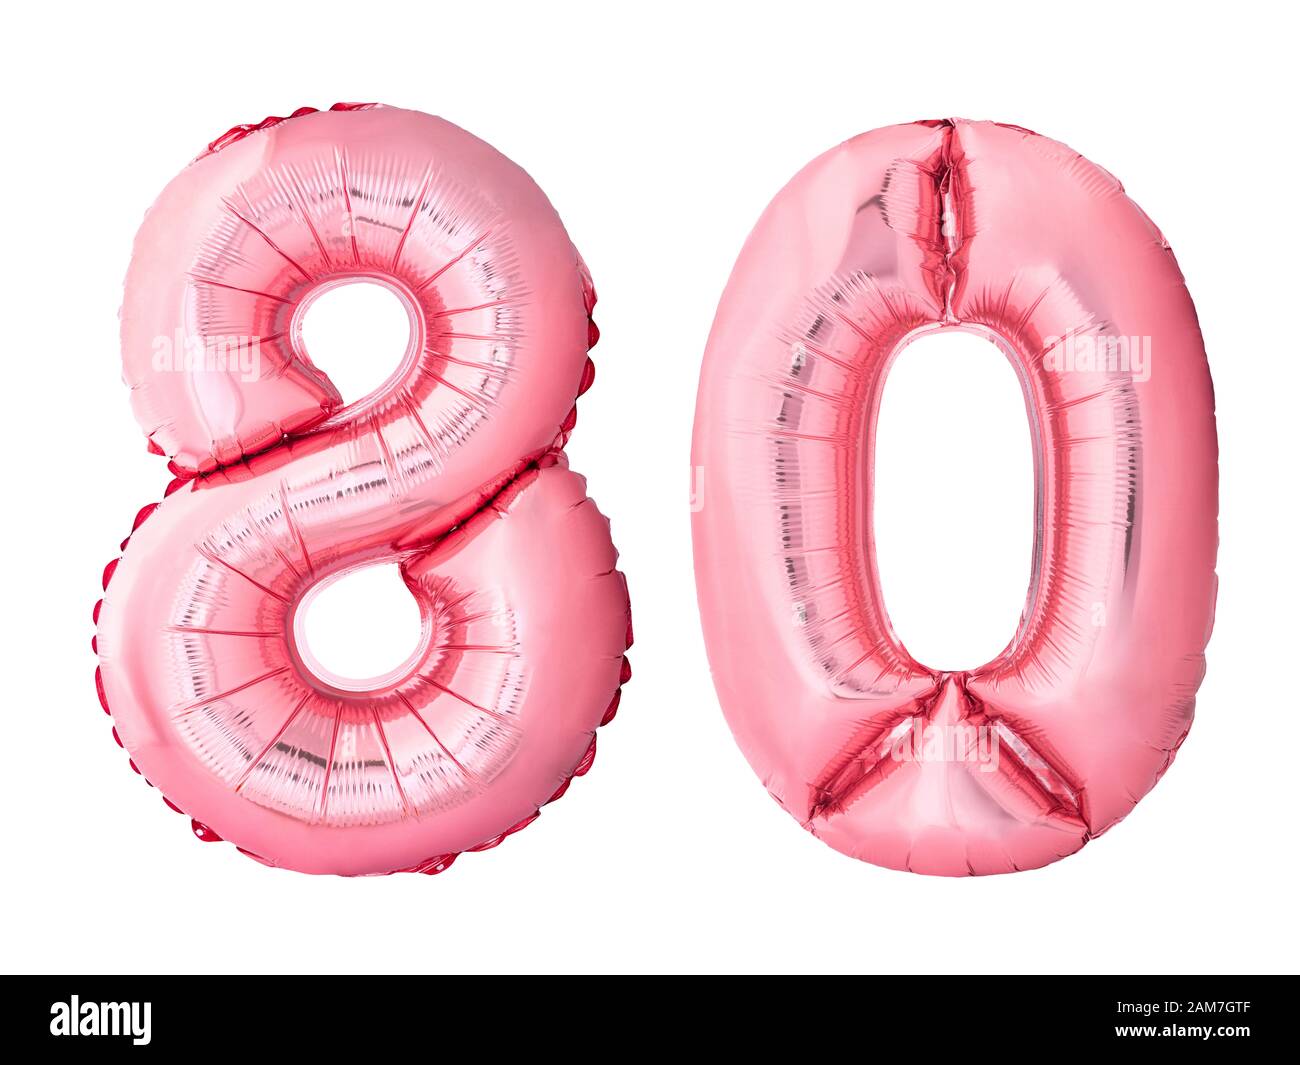 Number 80 eighty made of rose gold inflatable balloons isolated on white background. Discount and sale or birthday concept Stock Photo